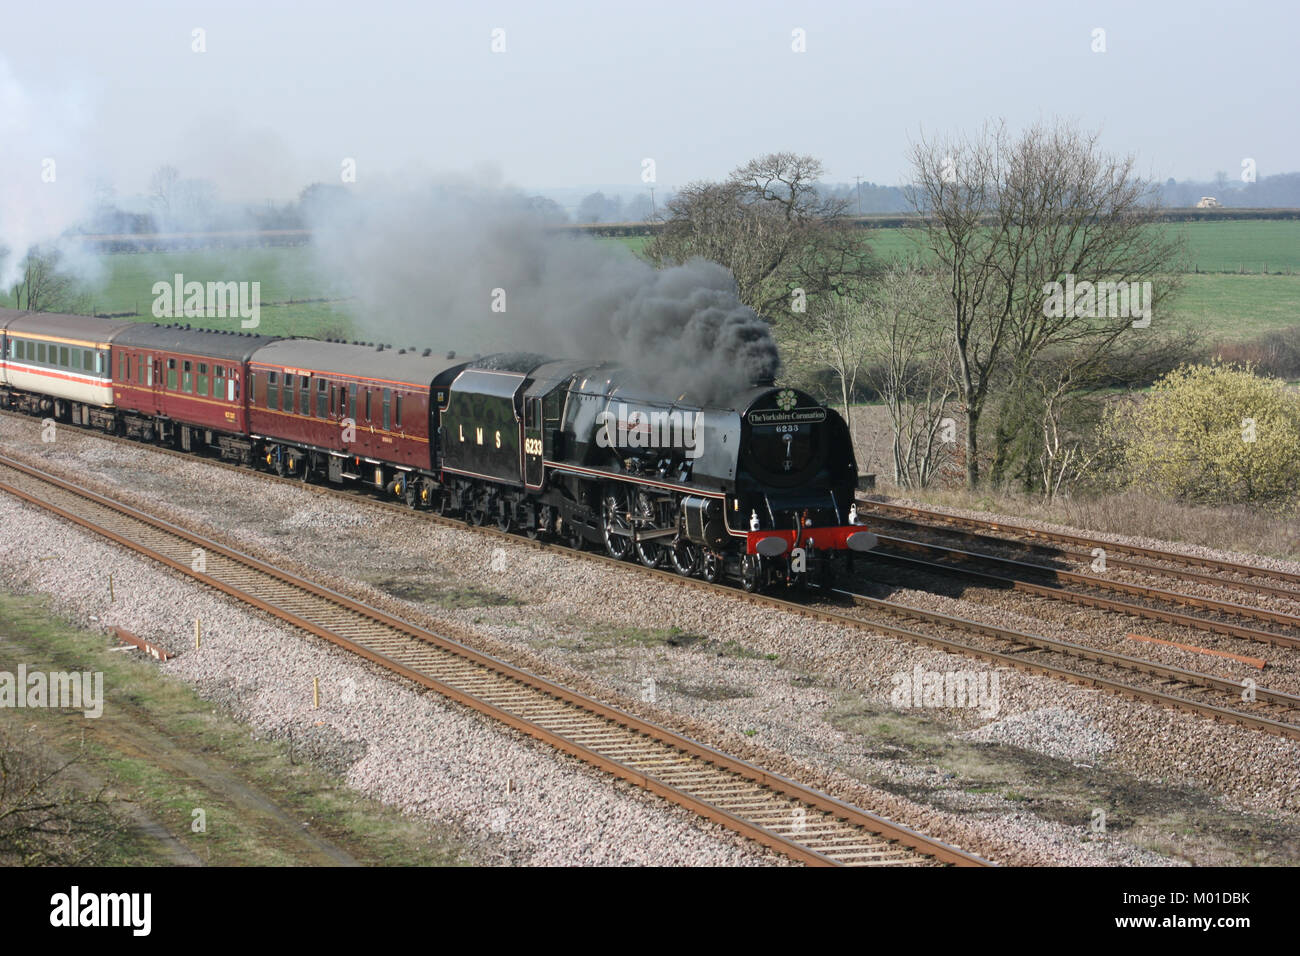 LMS Pacific Steam Locomotive No. 6233 Duchess of Sutherland at Bolton Percy, 10th April 2010 - Bolton Percy, Yorkshire, United Kingdom Stock Photo